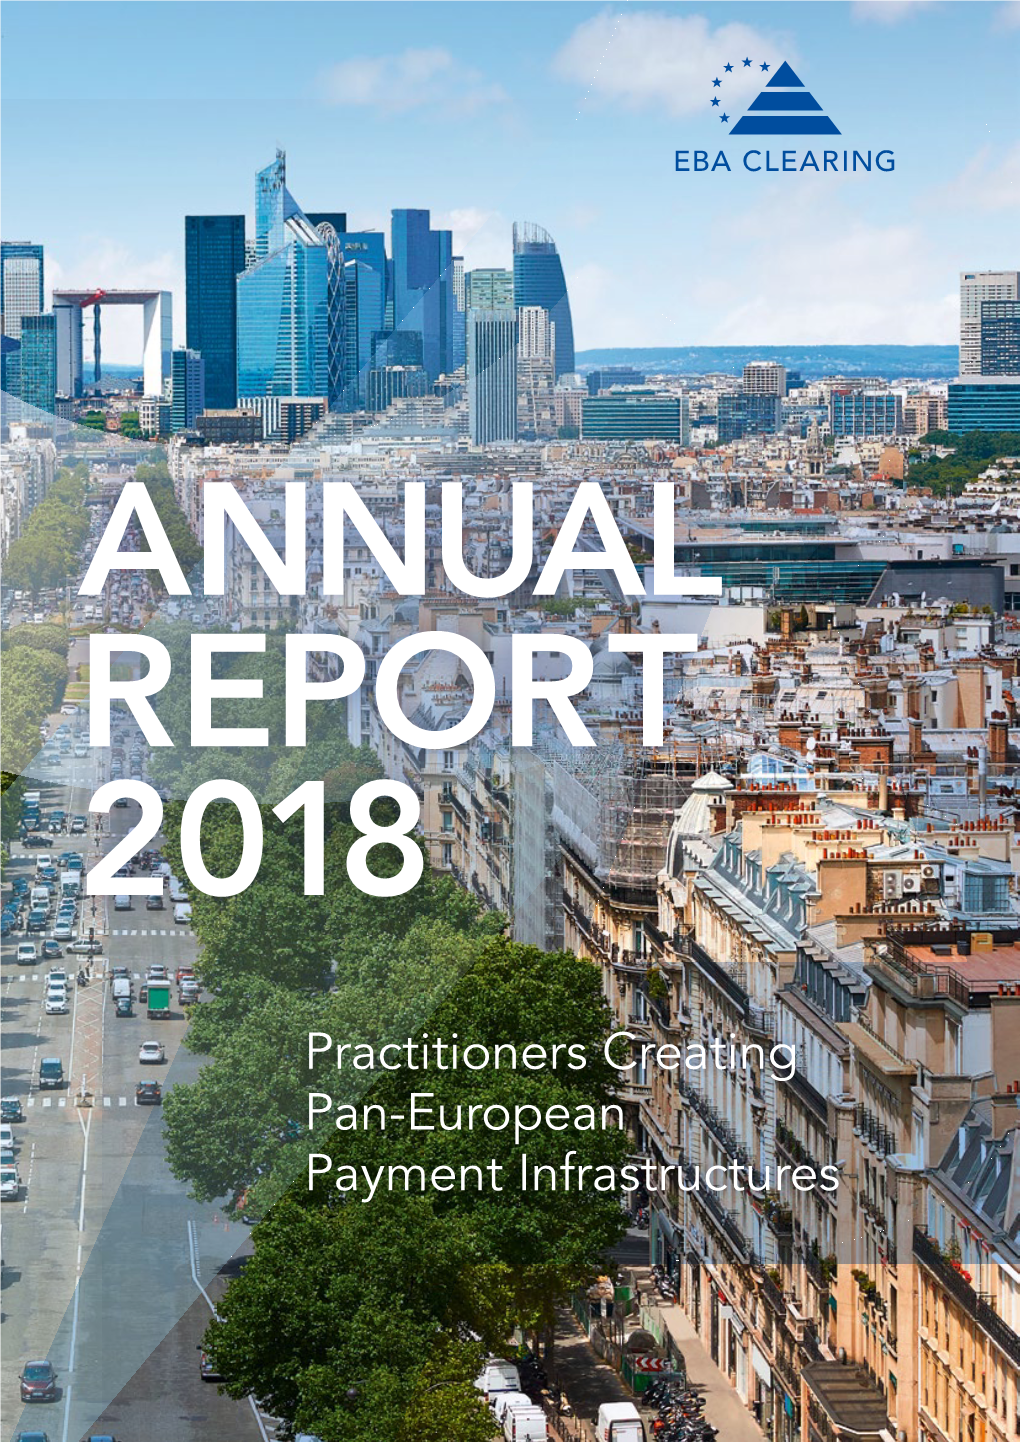 Practitioners Creating Pan-European Payment